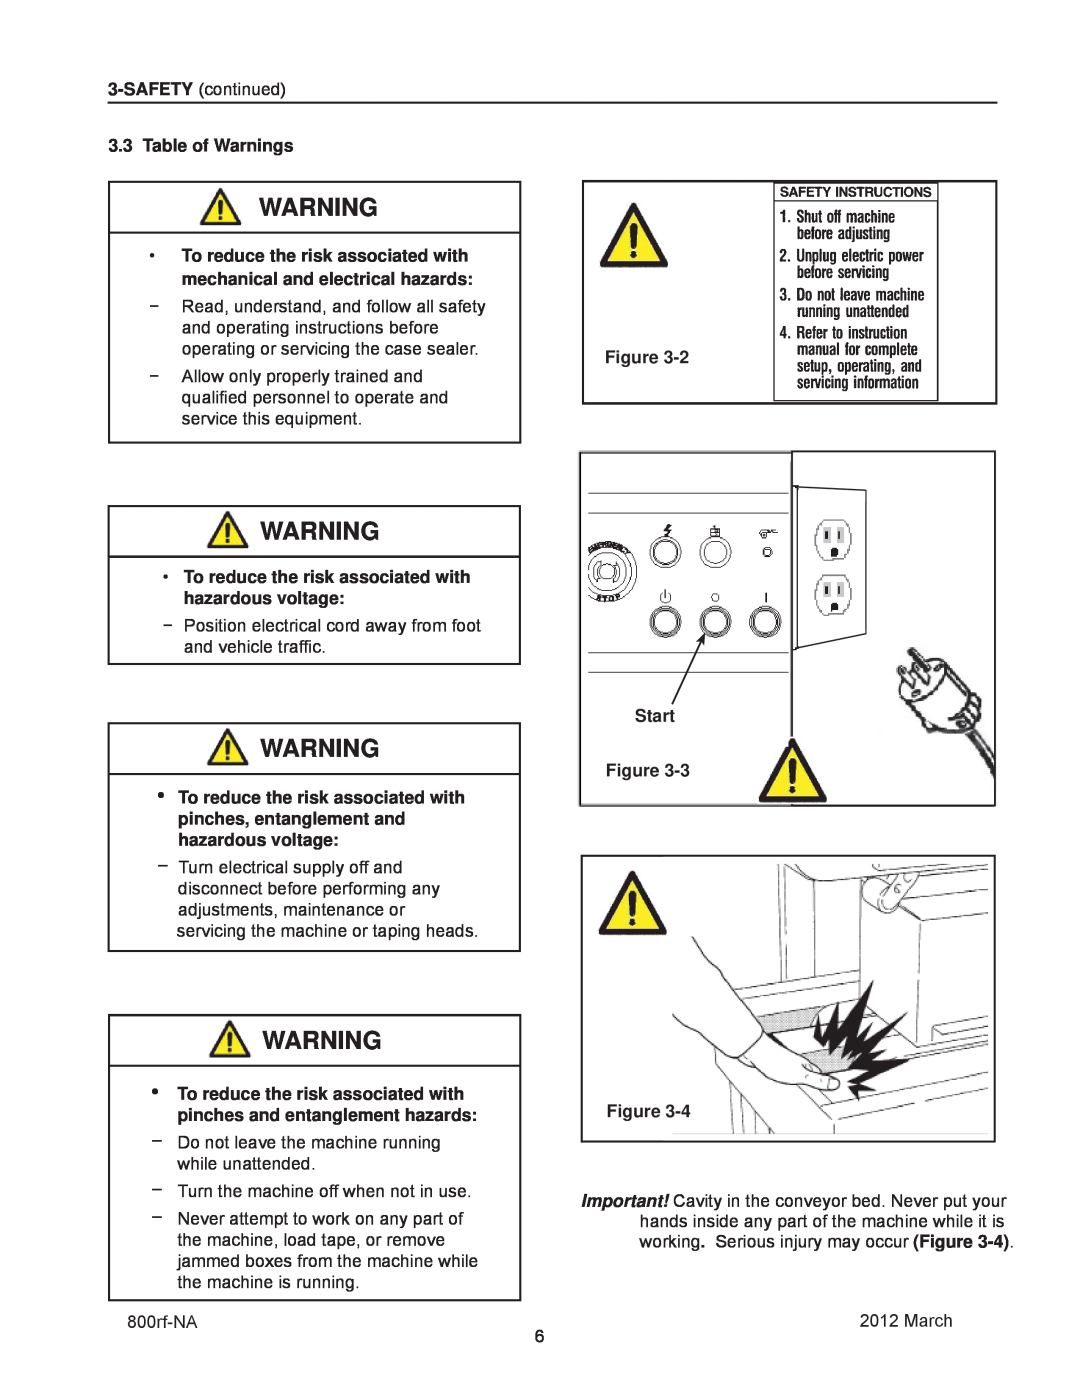 3M 40800, 800rf manual Table of Warnings, To reduce the risk associated with mechanical and electrical hazards, Start 